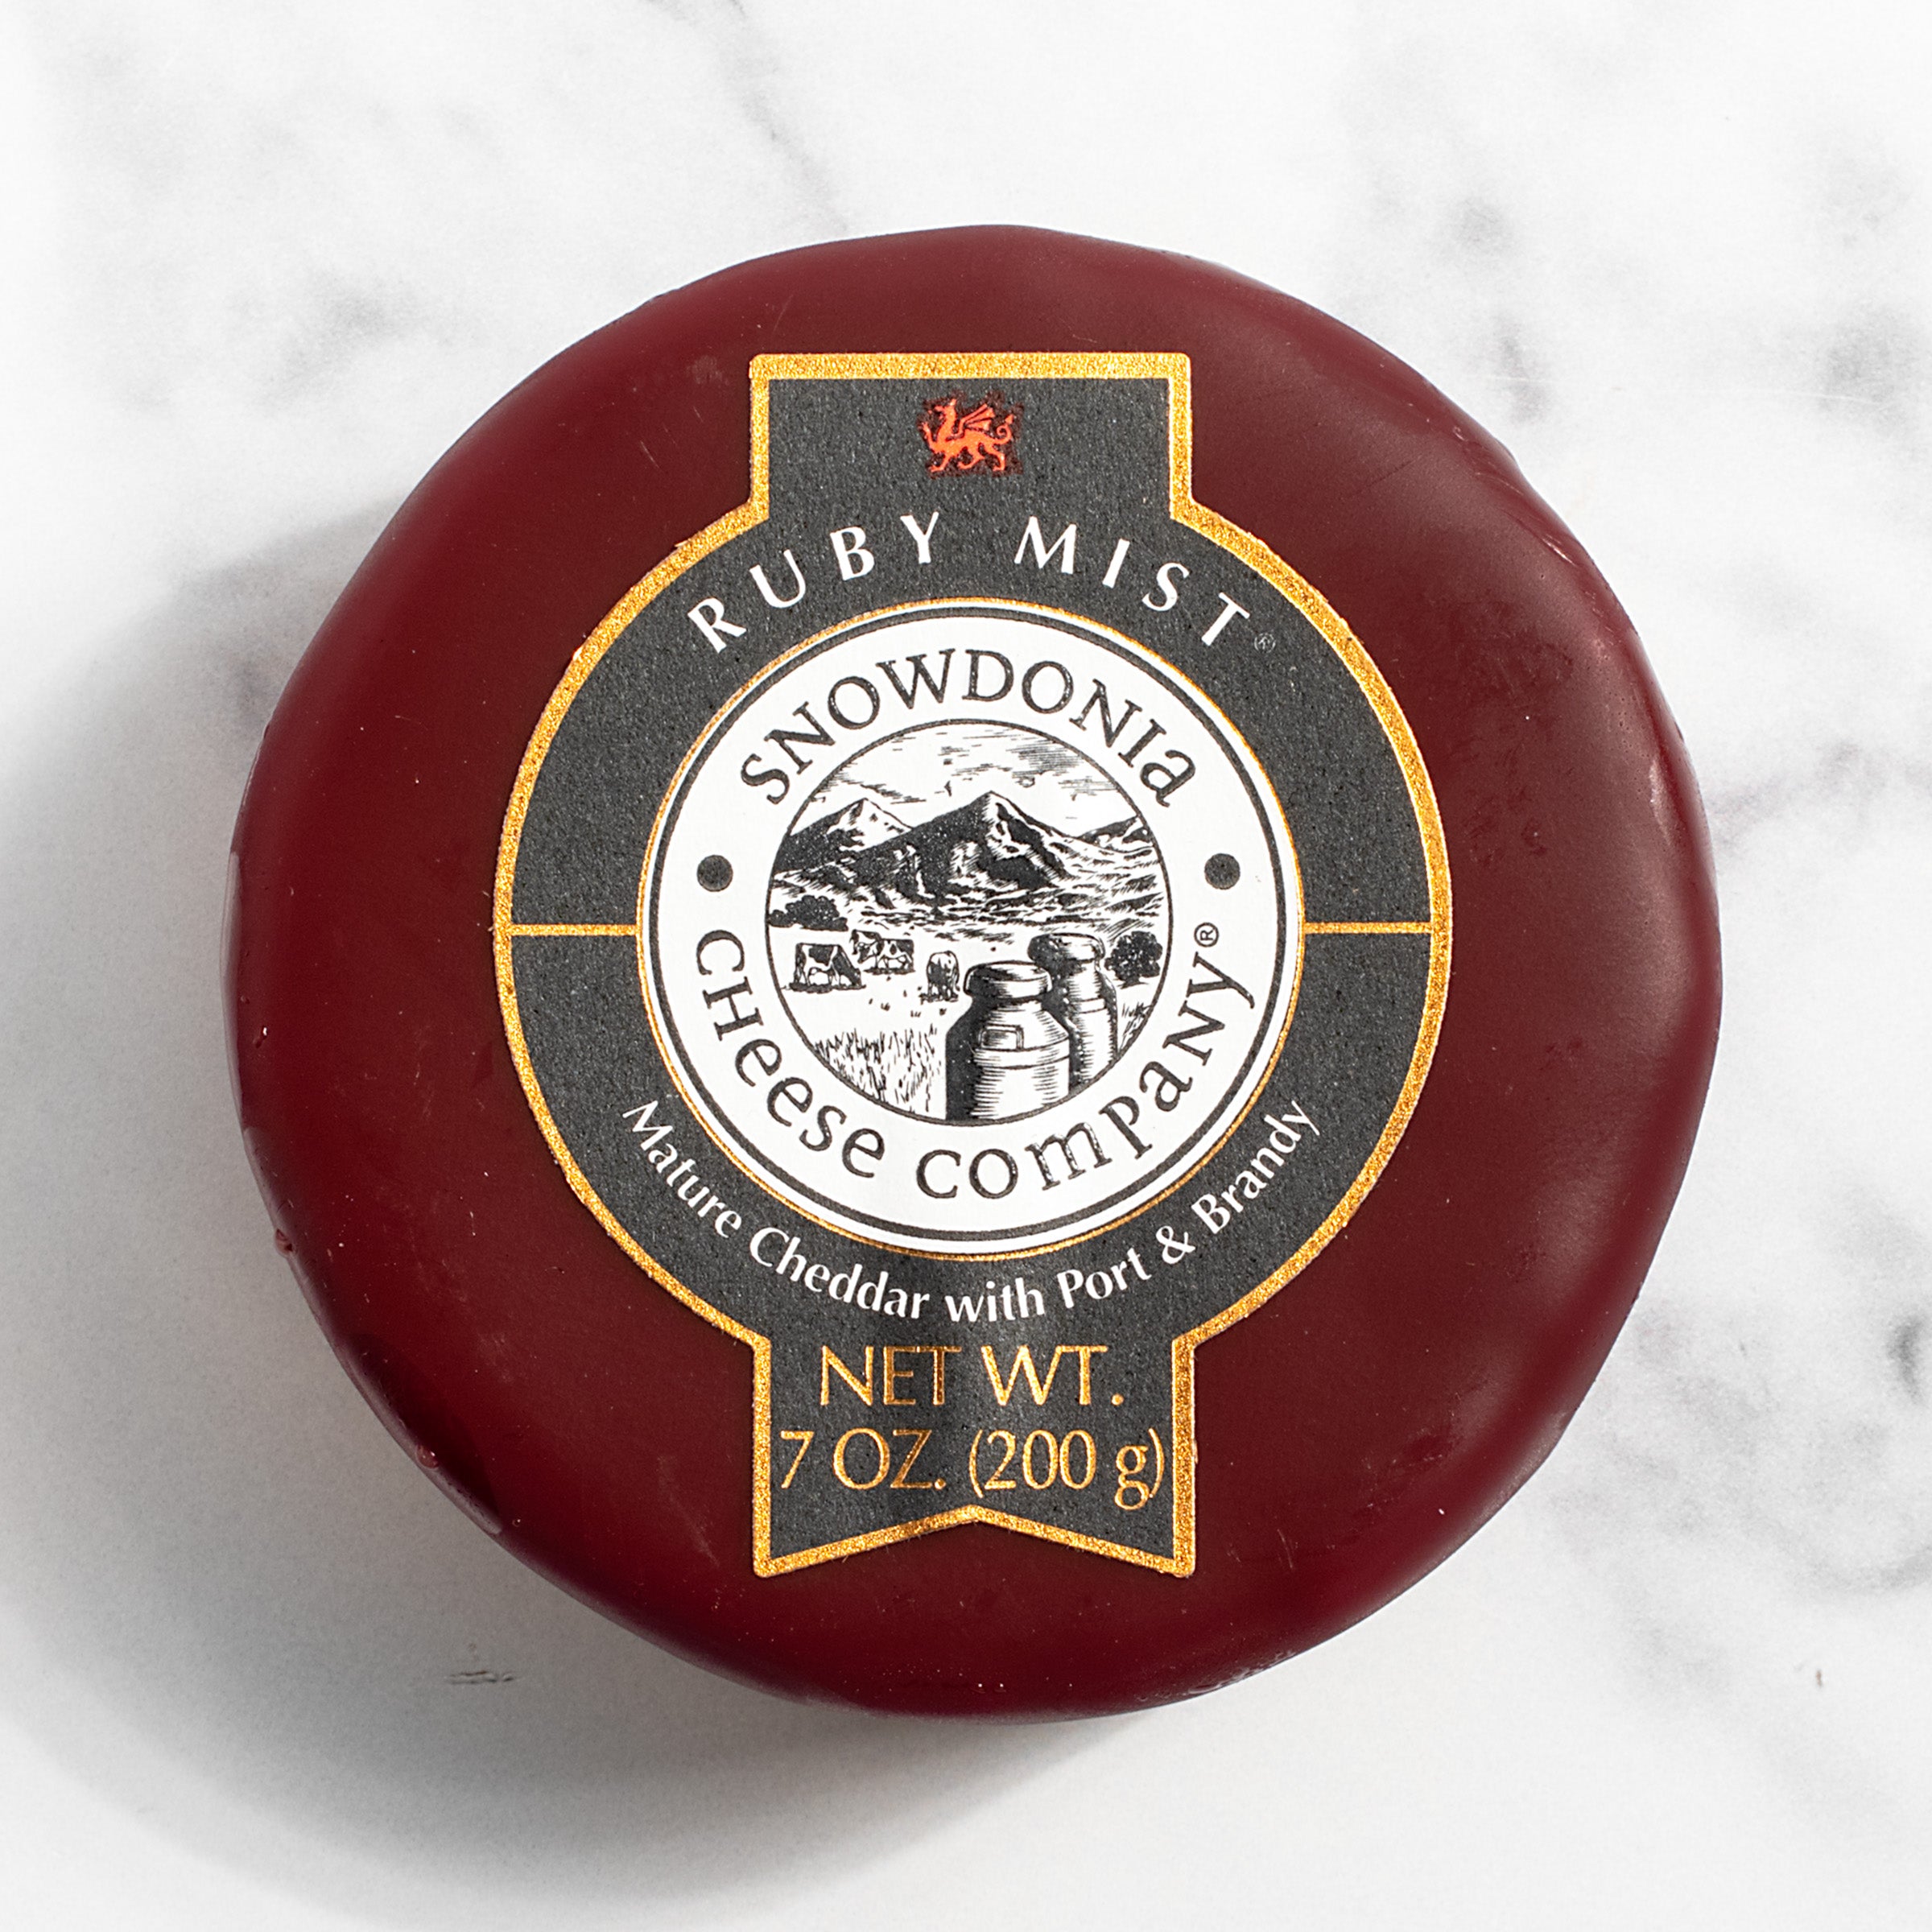 Ruby Mist Welsh Truckle Cheese - Mature Cheddar with Port & Brandy